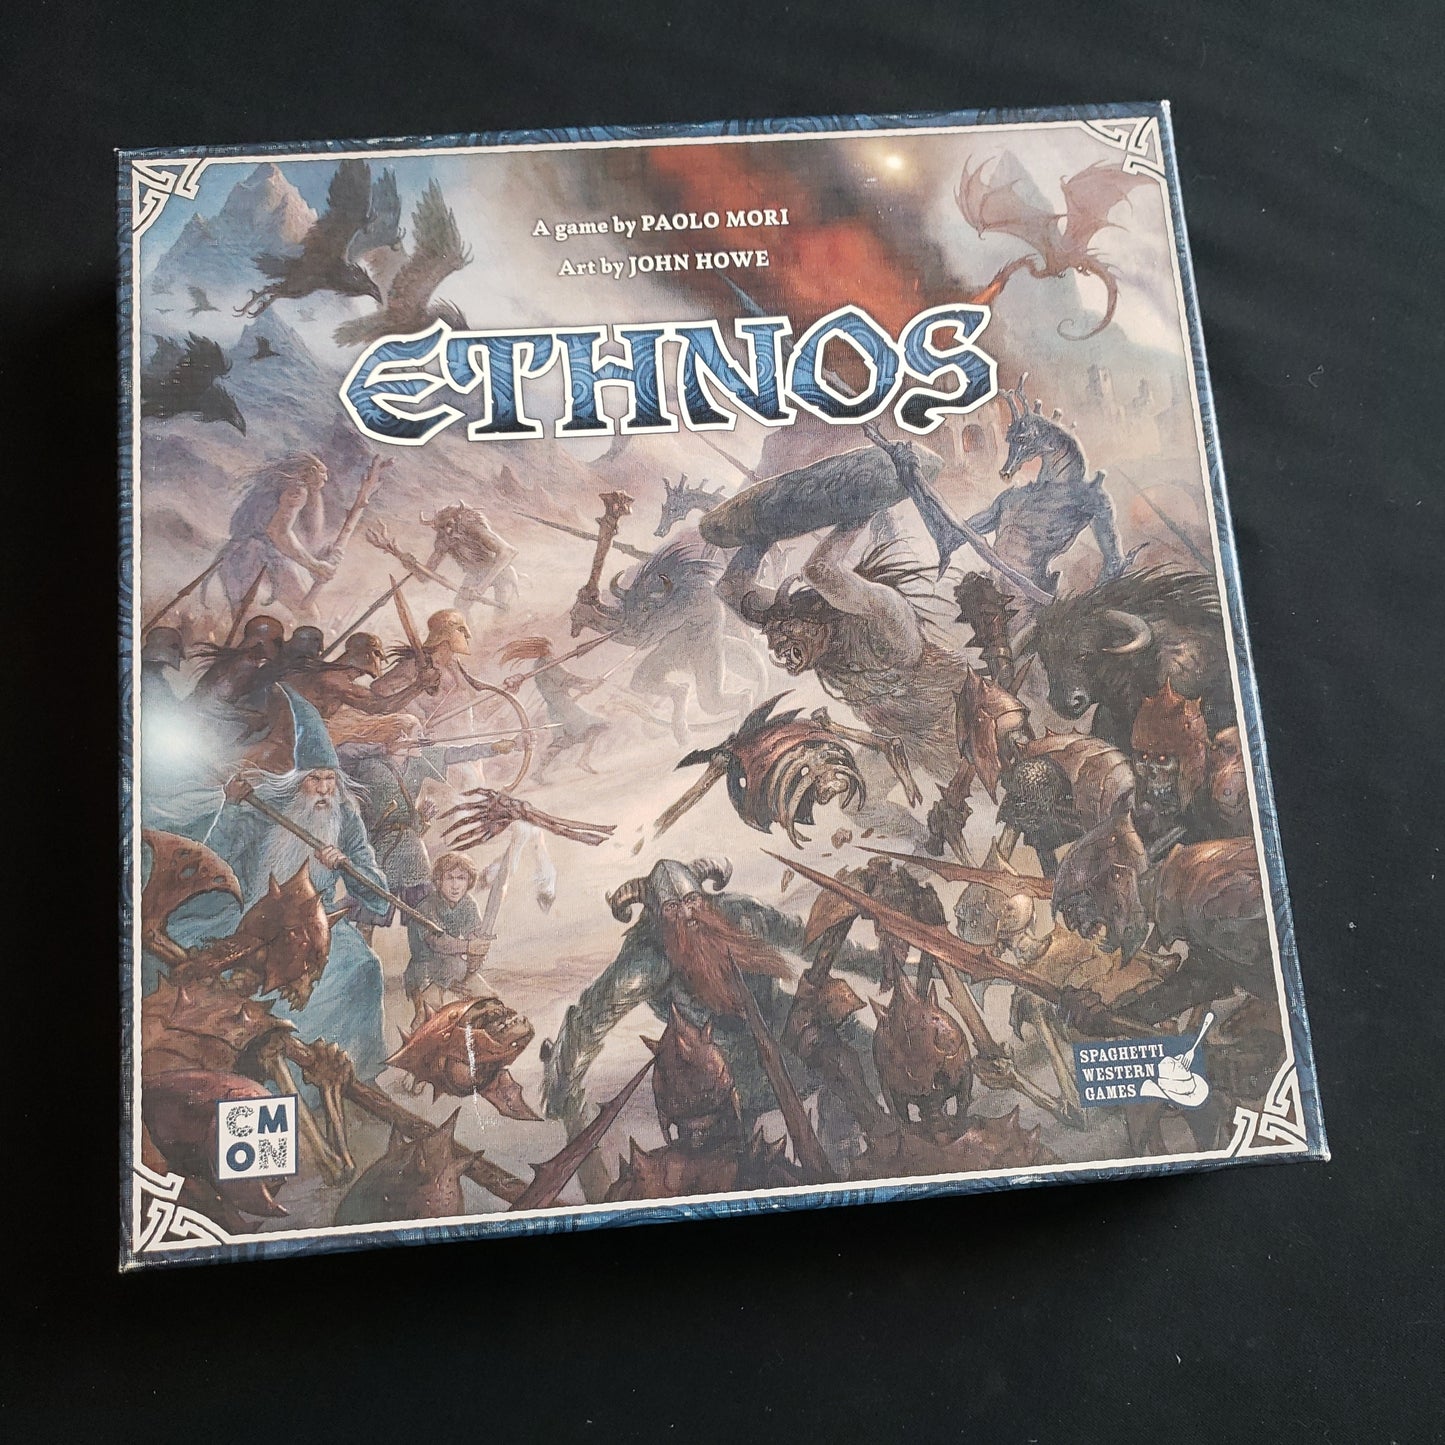 Image shows the front cover of the box of the Ethnos board game